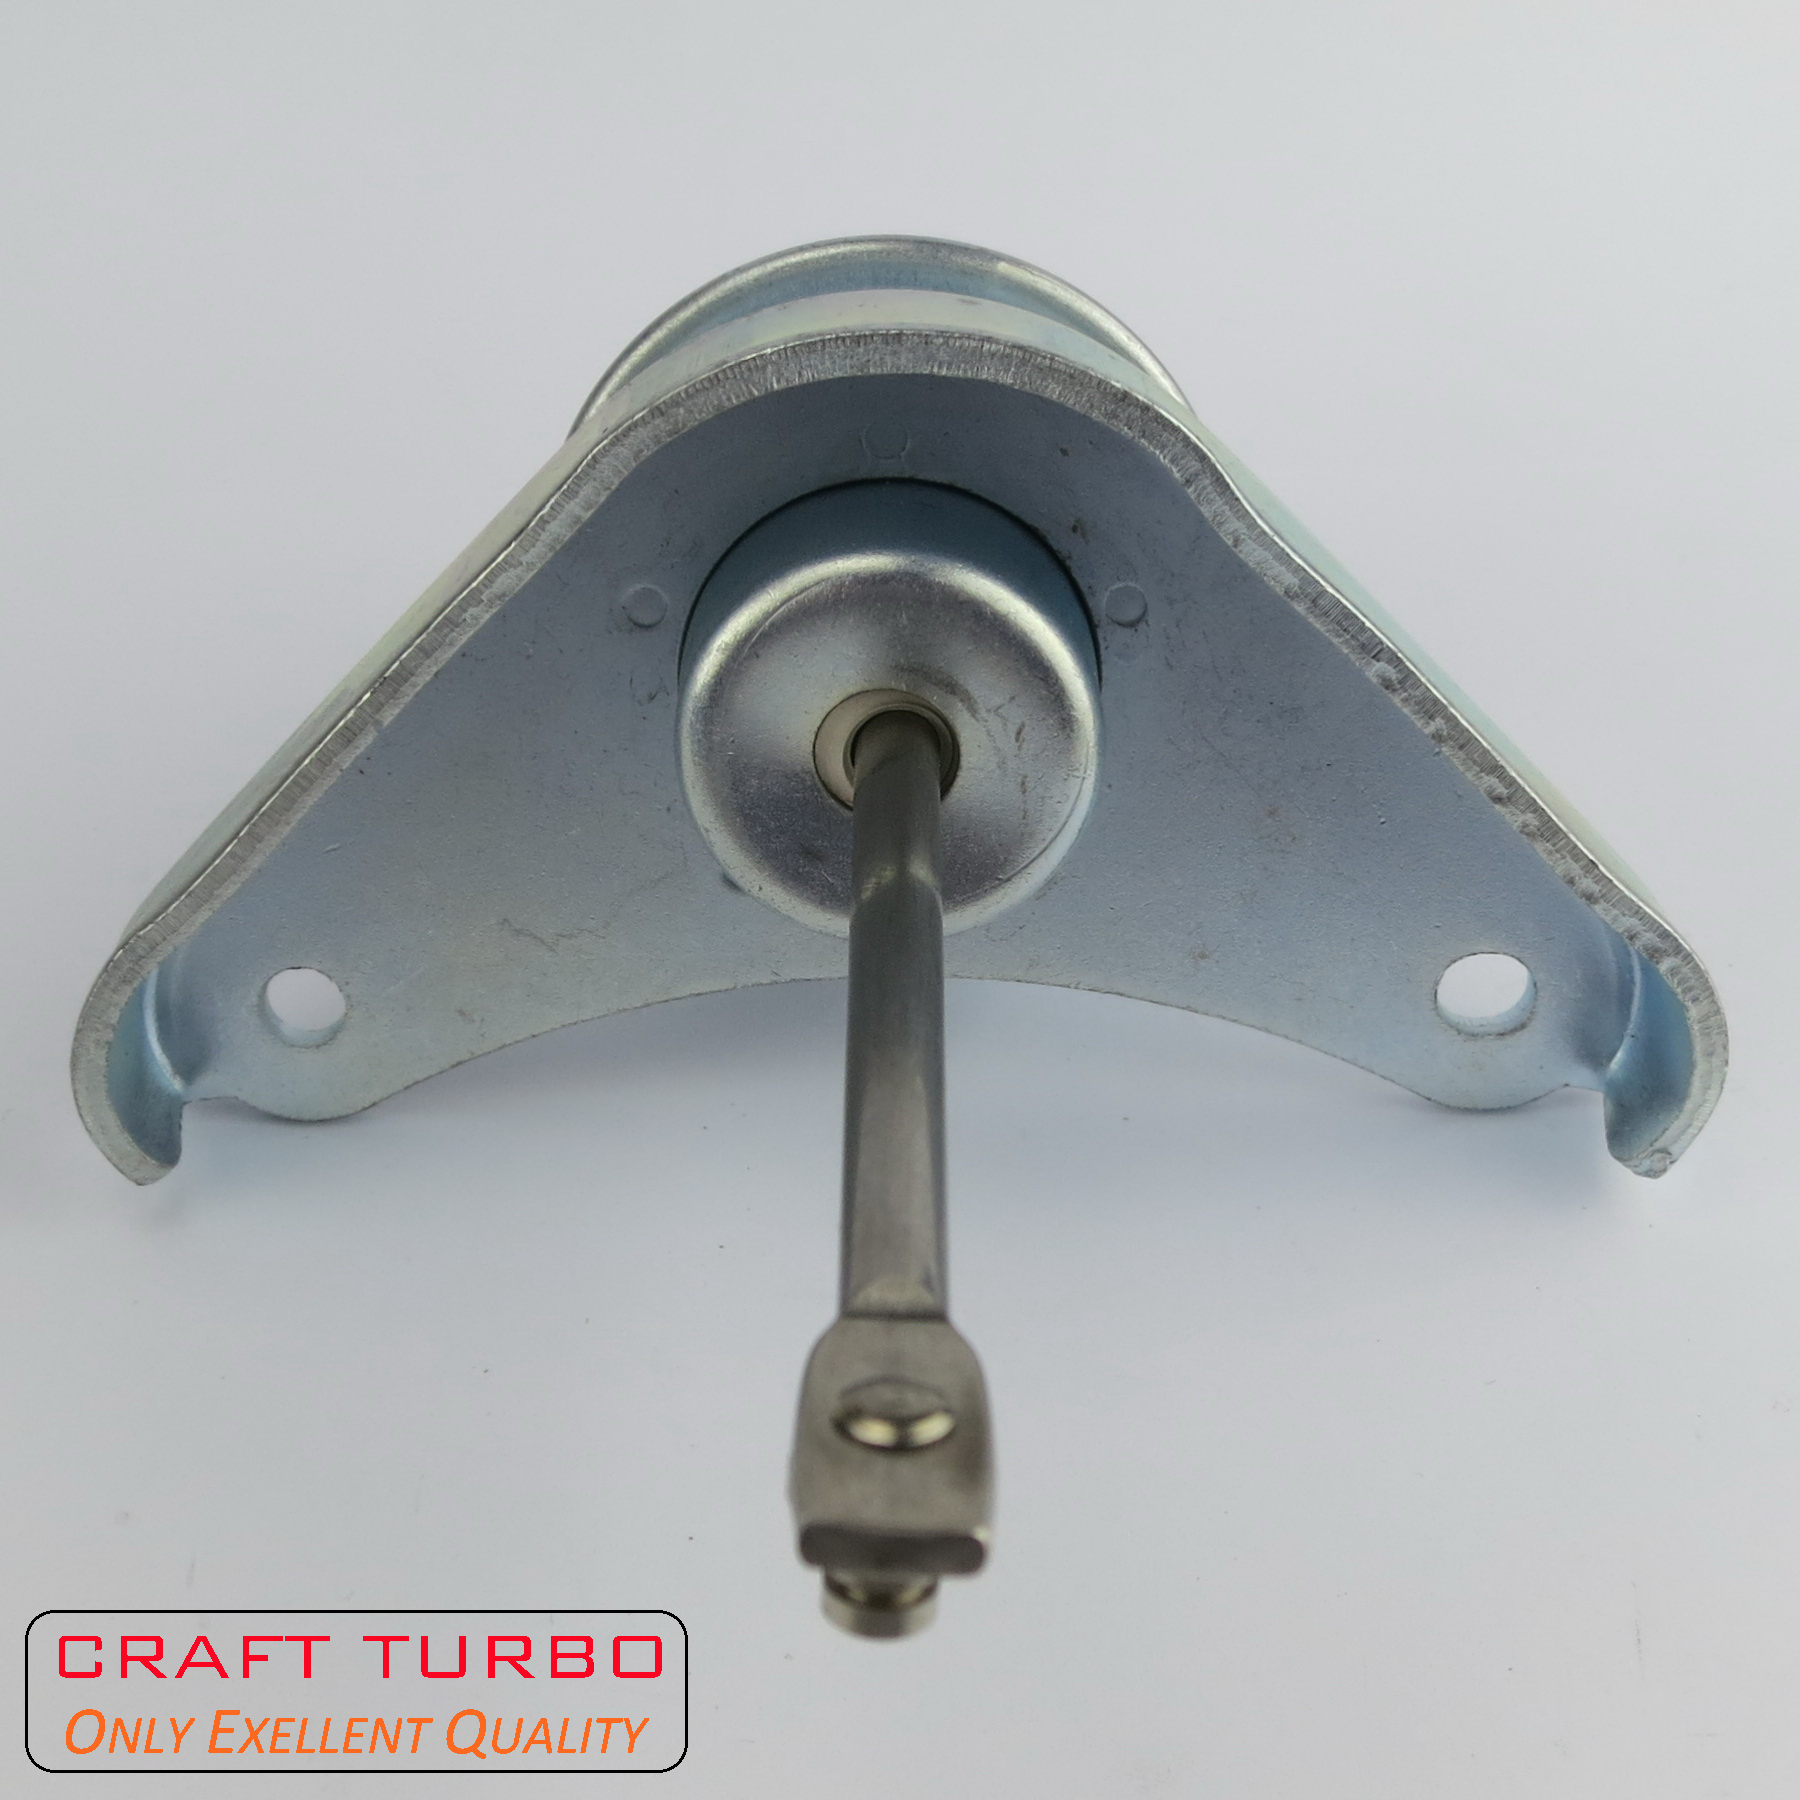 CT20 Actuator for Turbochargers